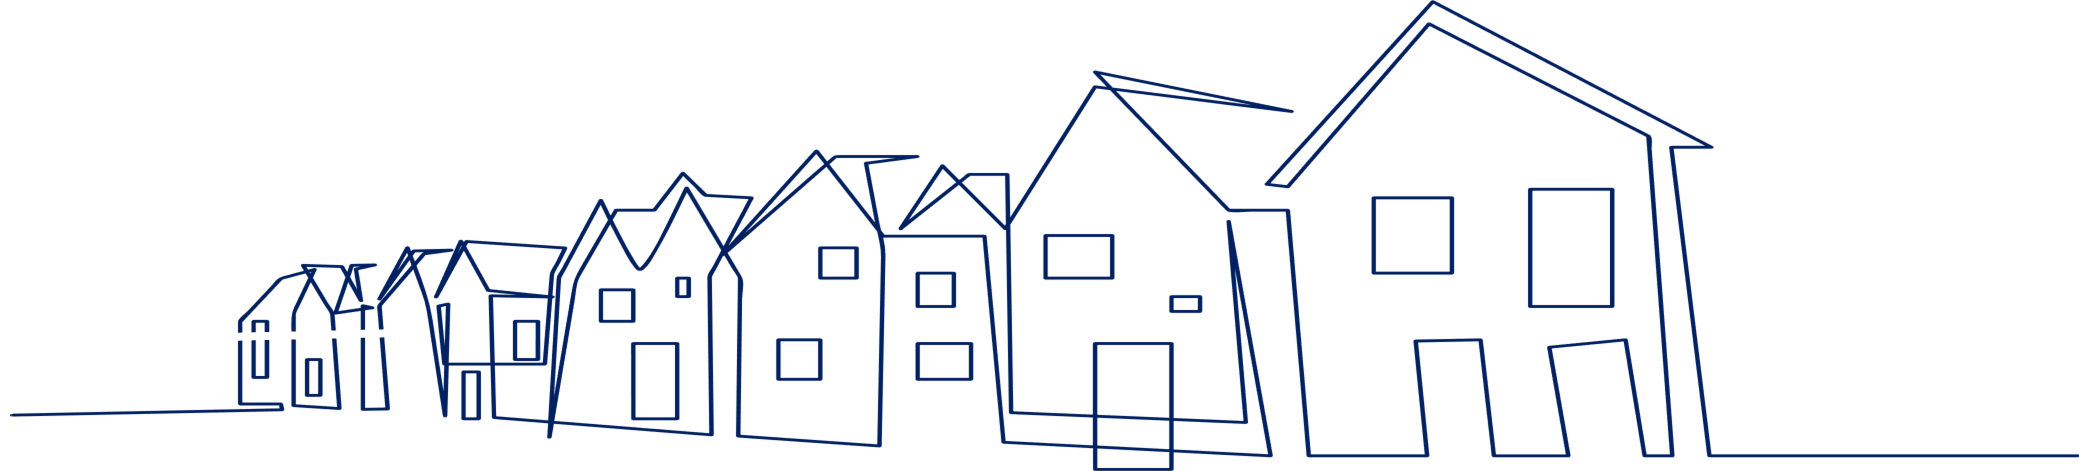 Sketch outline of houses